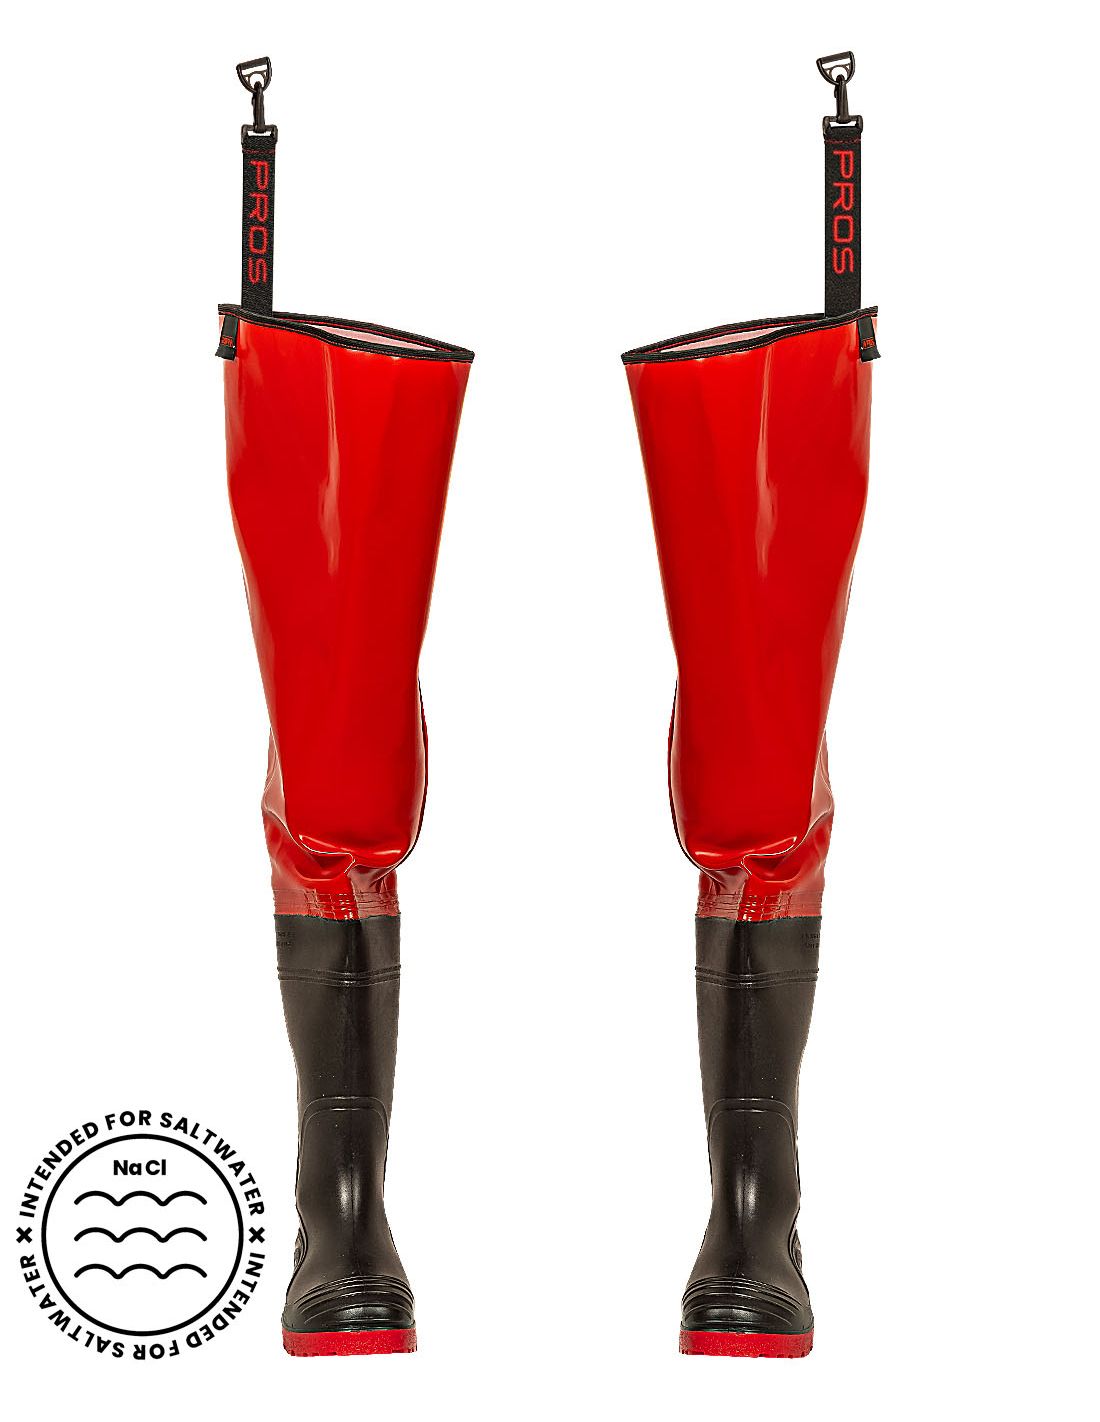 Thigh Waders STRONG - Red - PROS